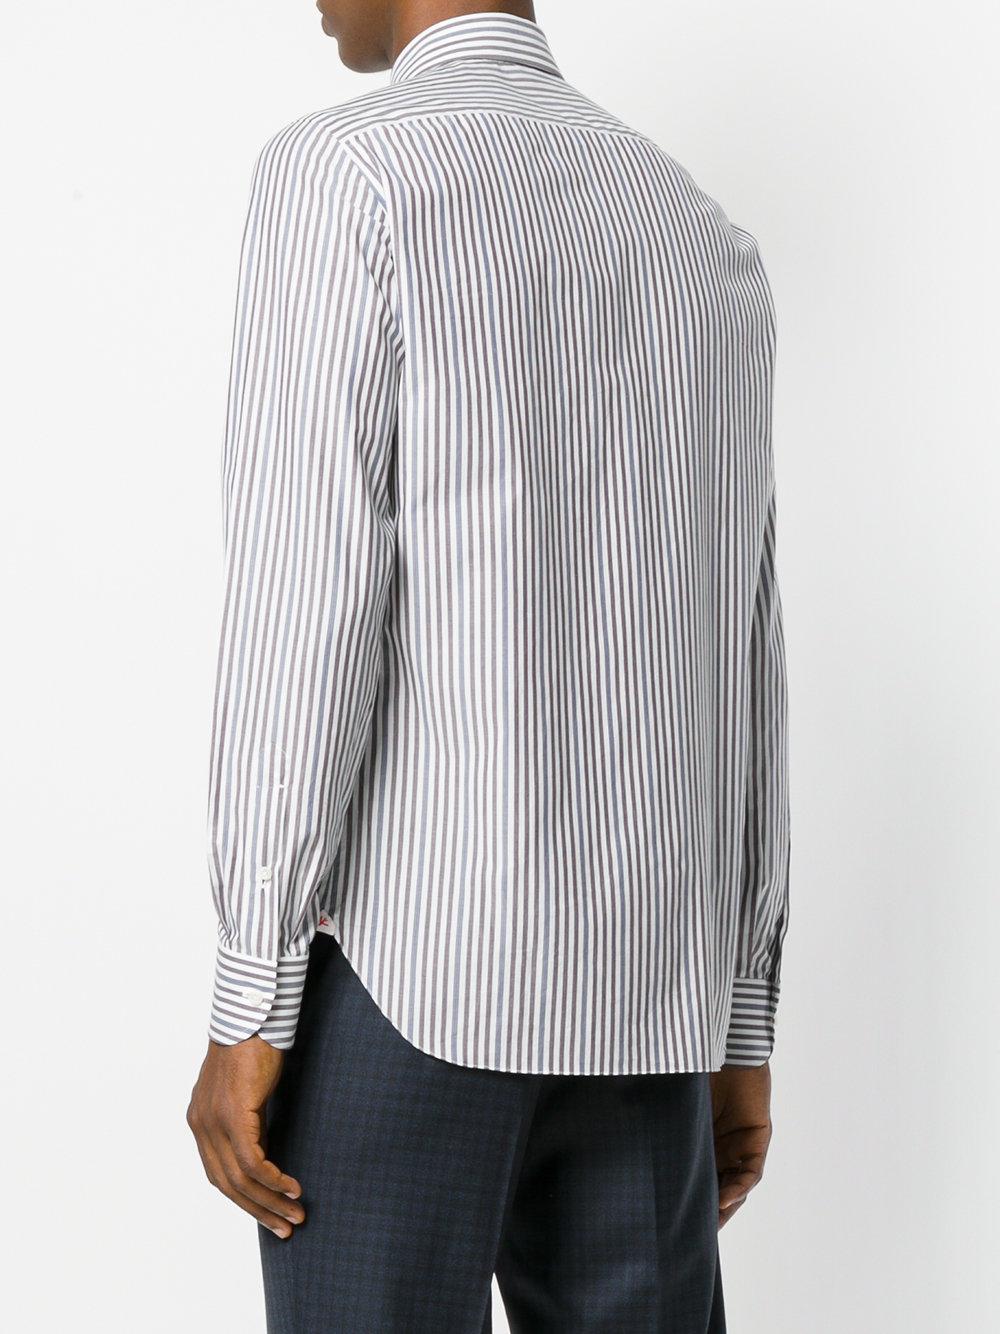 Lyst - Isaia Striped Shirt in Blue for Men